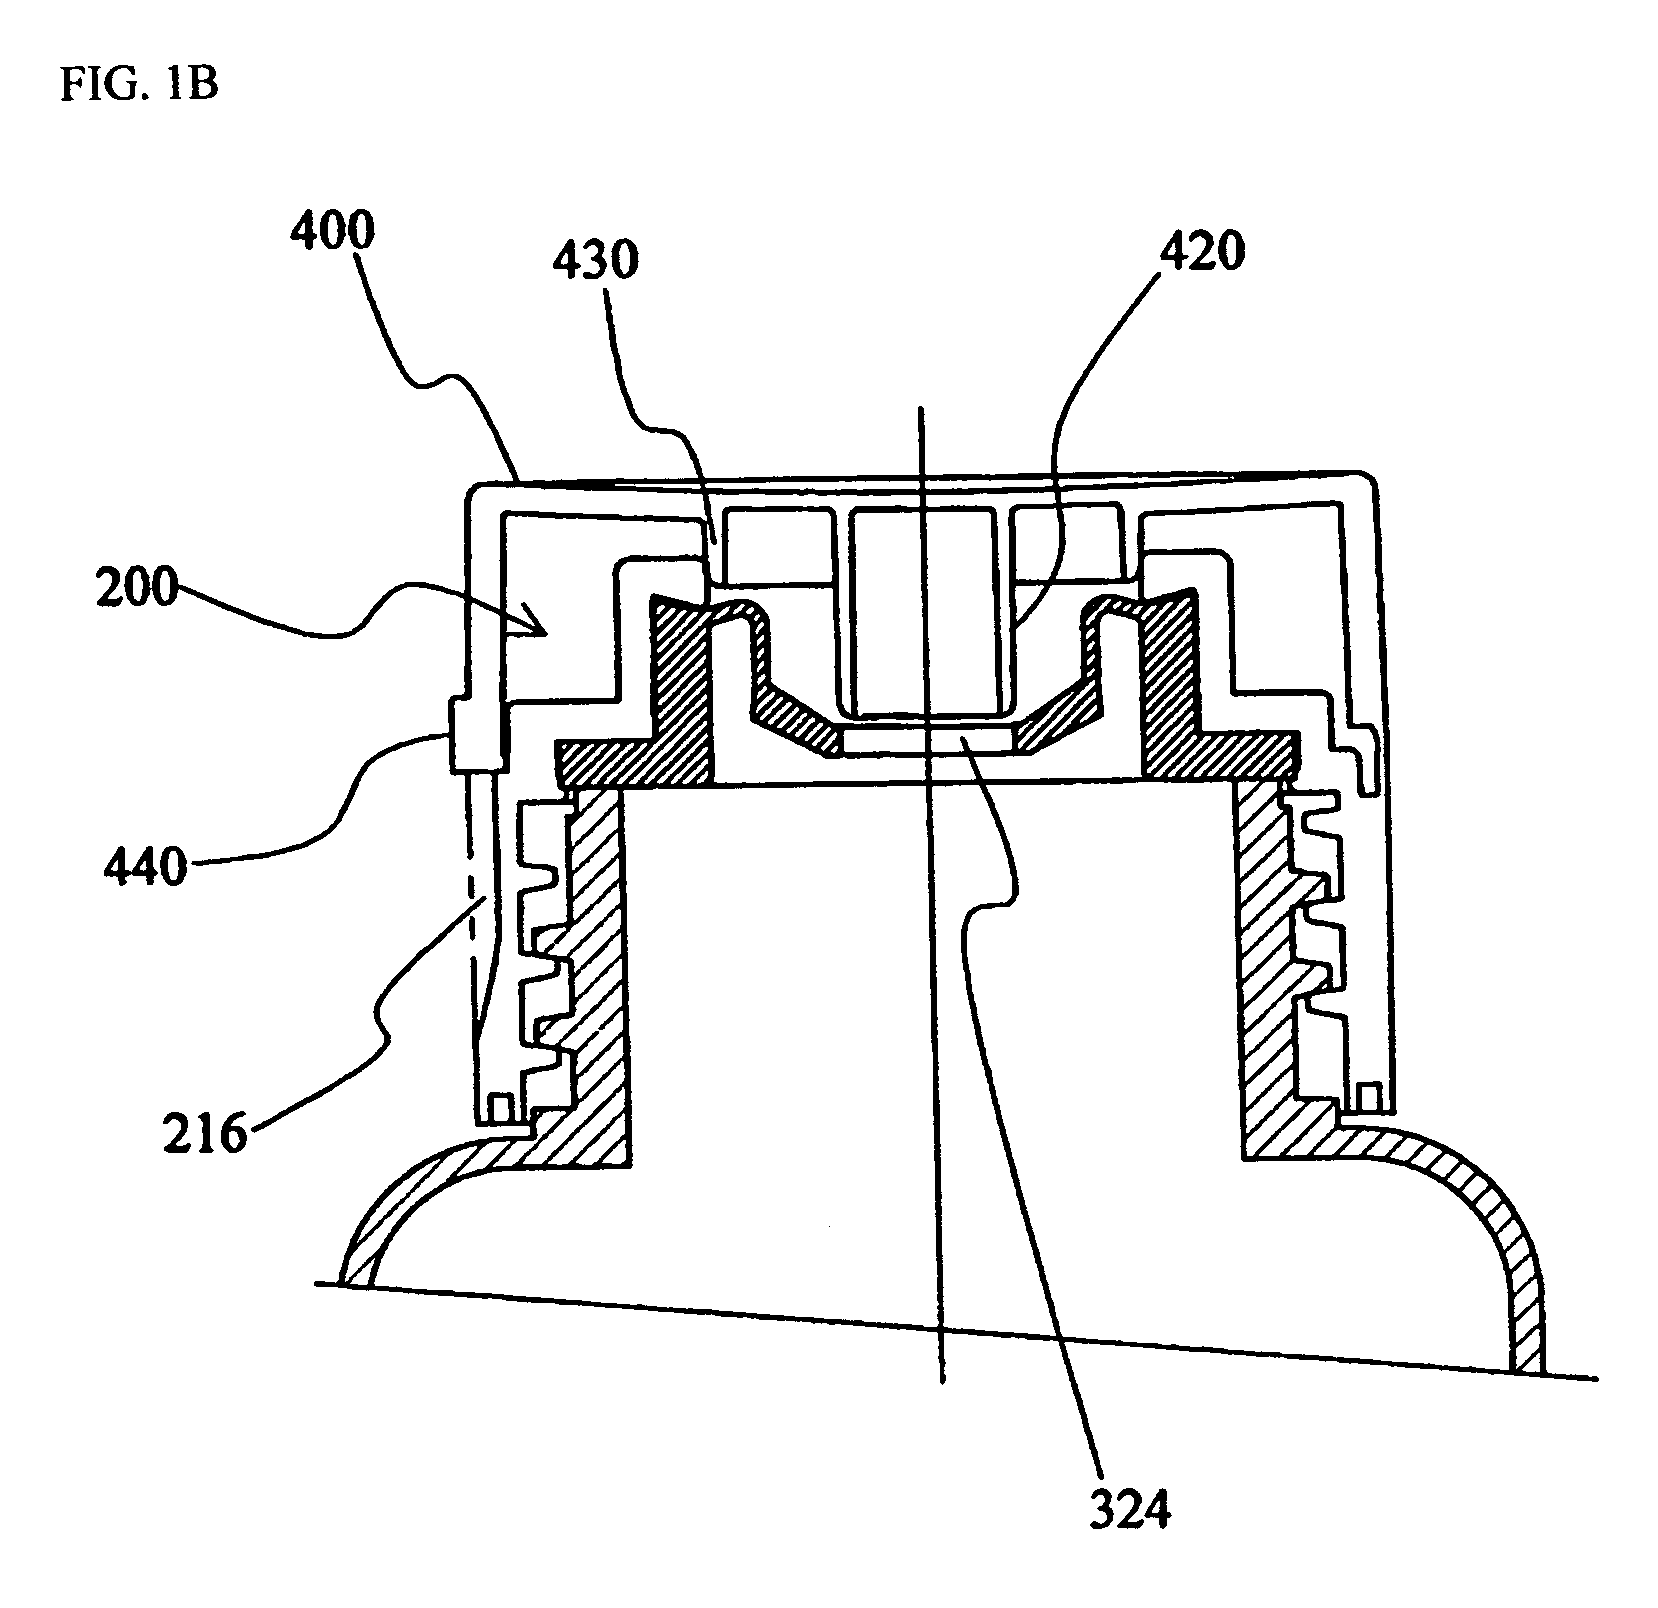 Dispensing closure with automatic sealing valve of single body